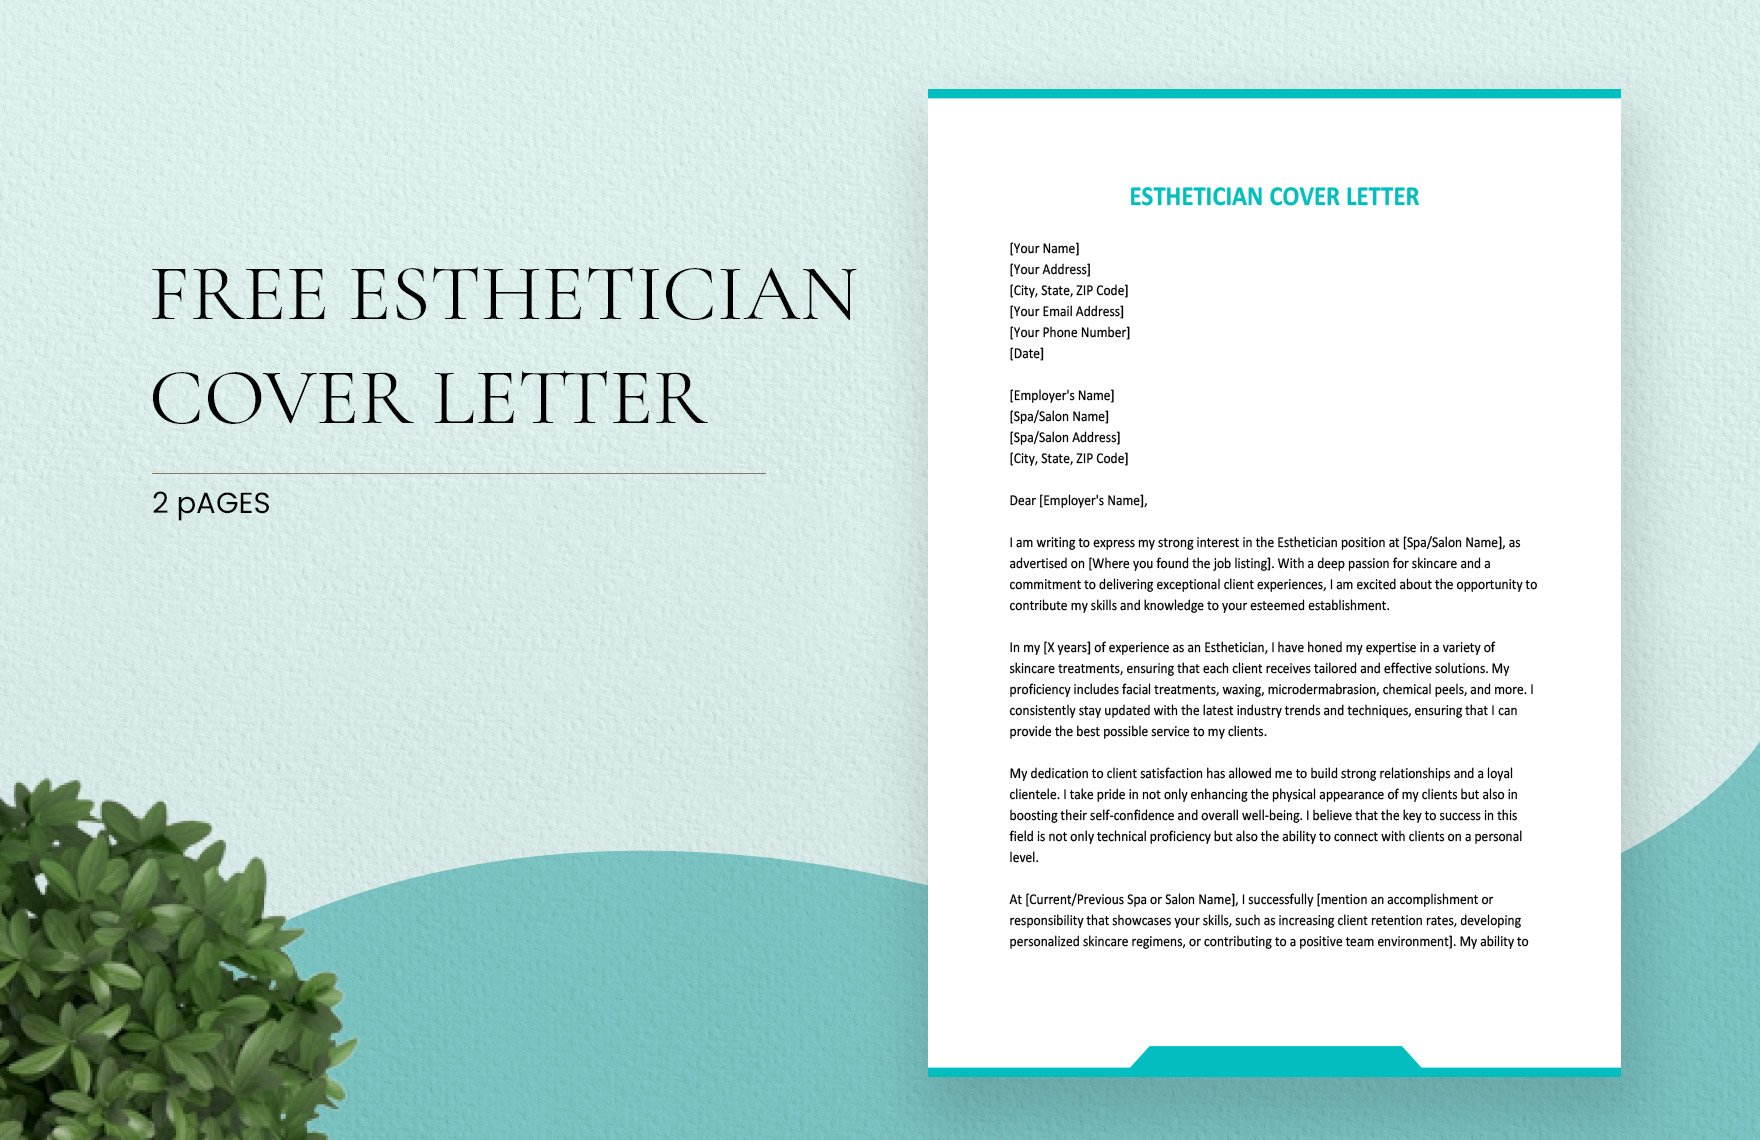 Esthetician Cover Letter in Word, Google Docs